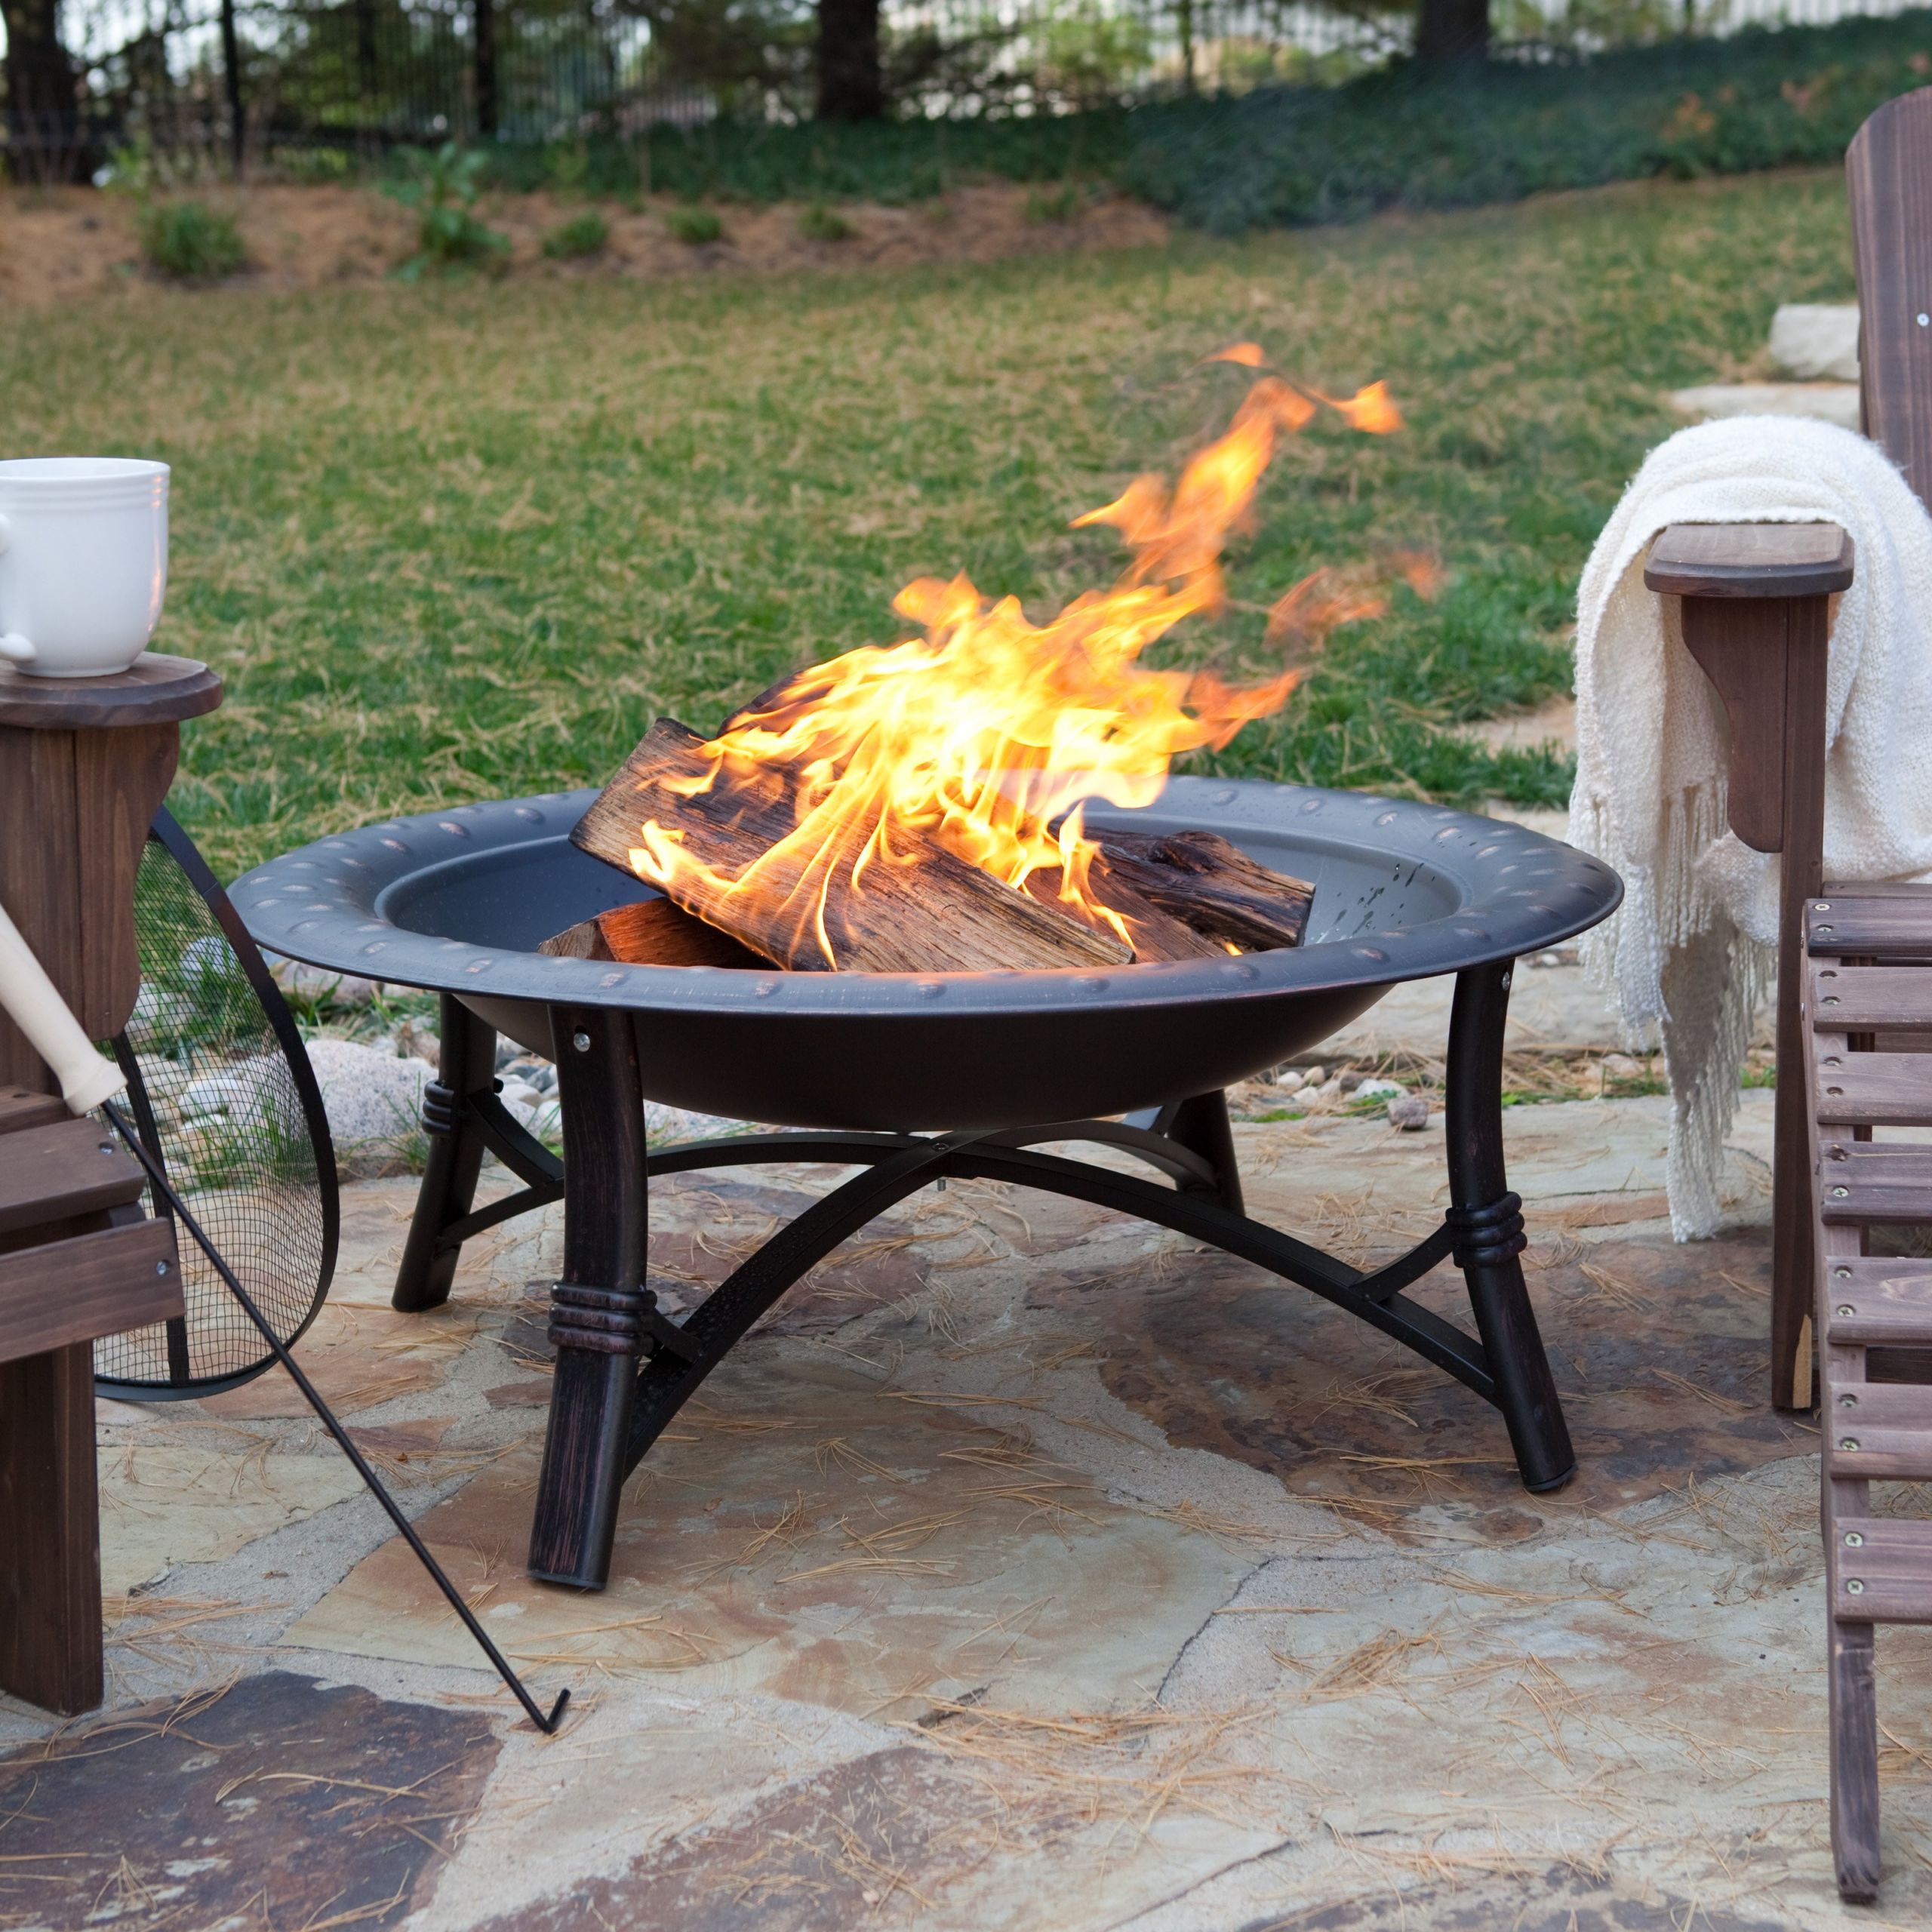 Fireplace Fire Pit
 Fire Sense 35 in Roman Fire Pit Fire Pits at Hayneedle